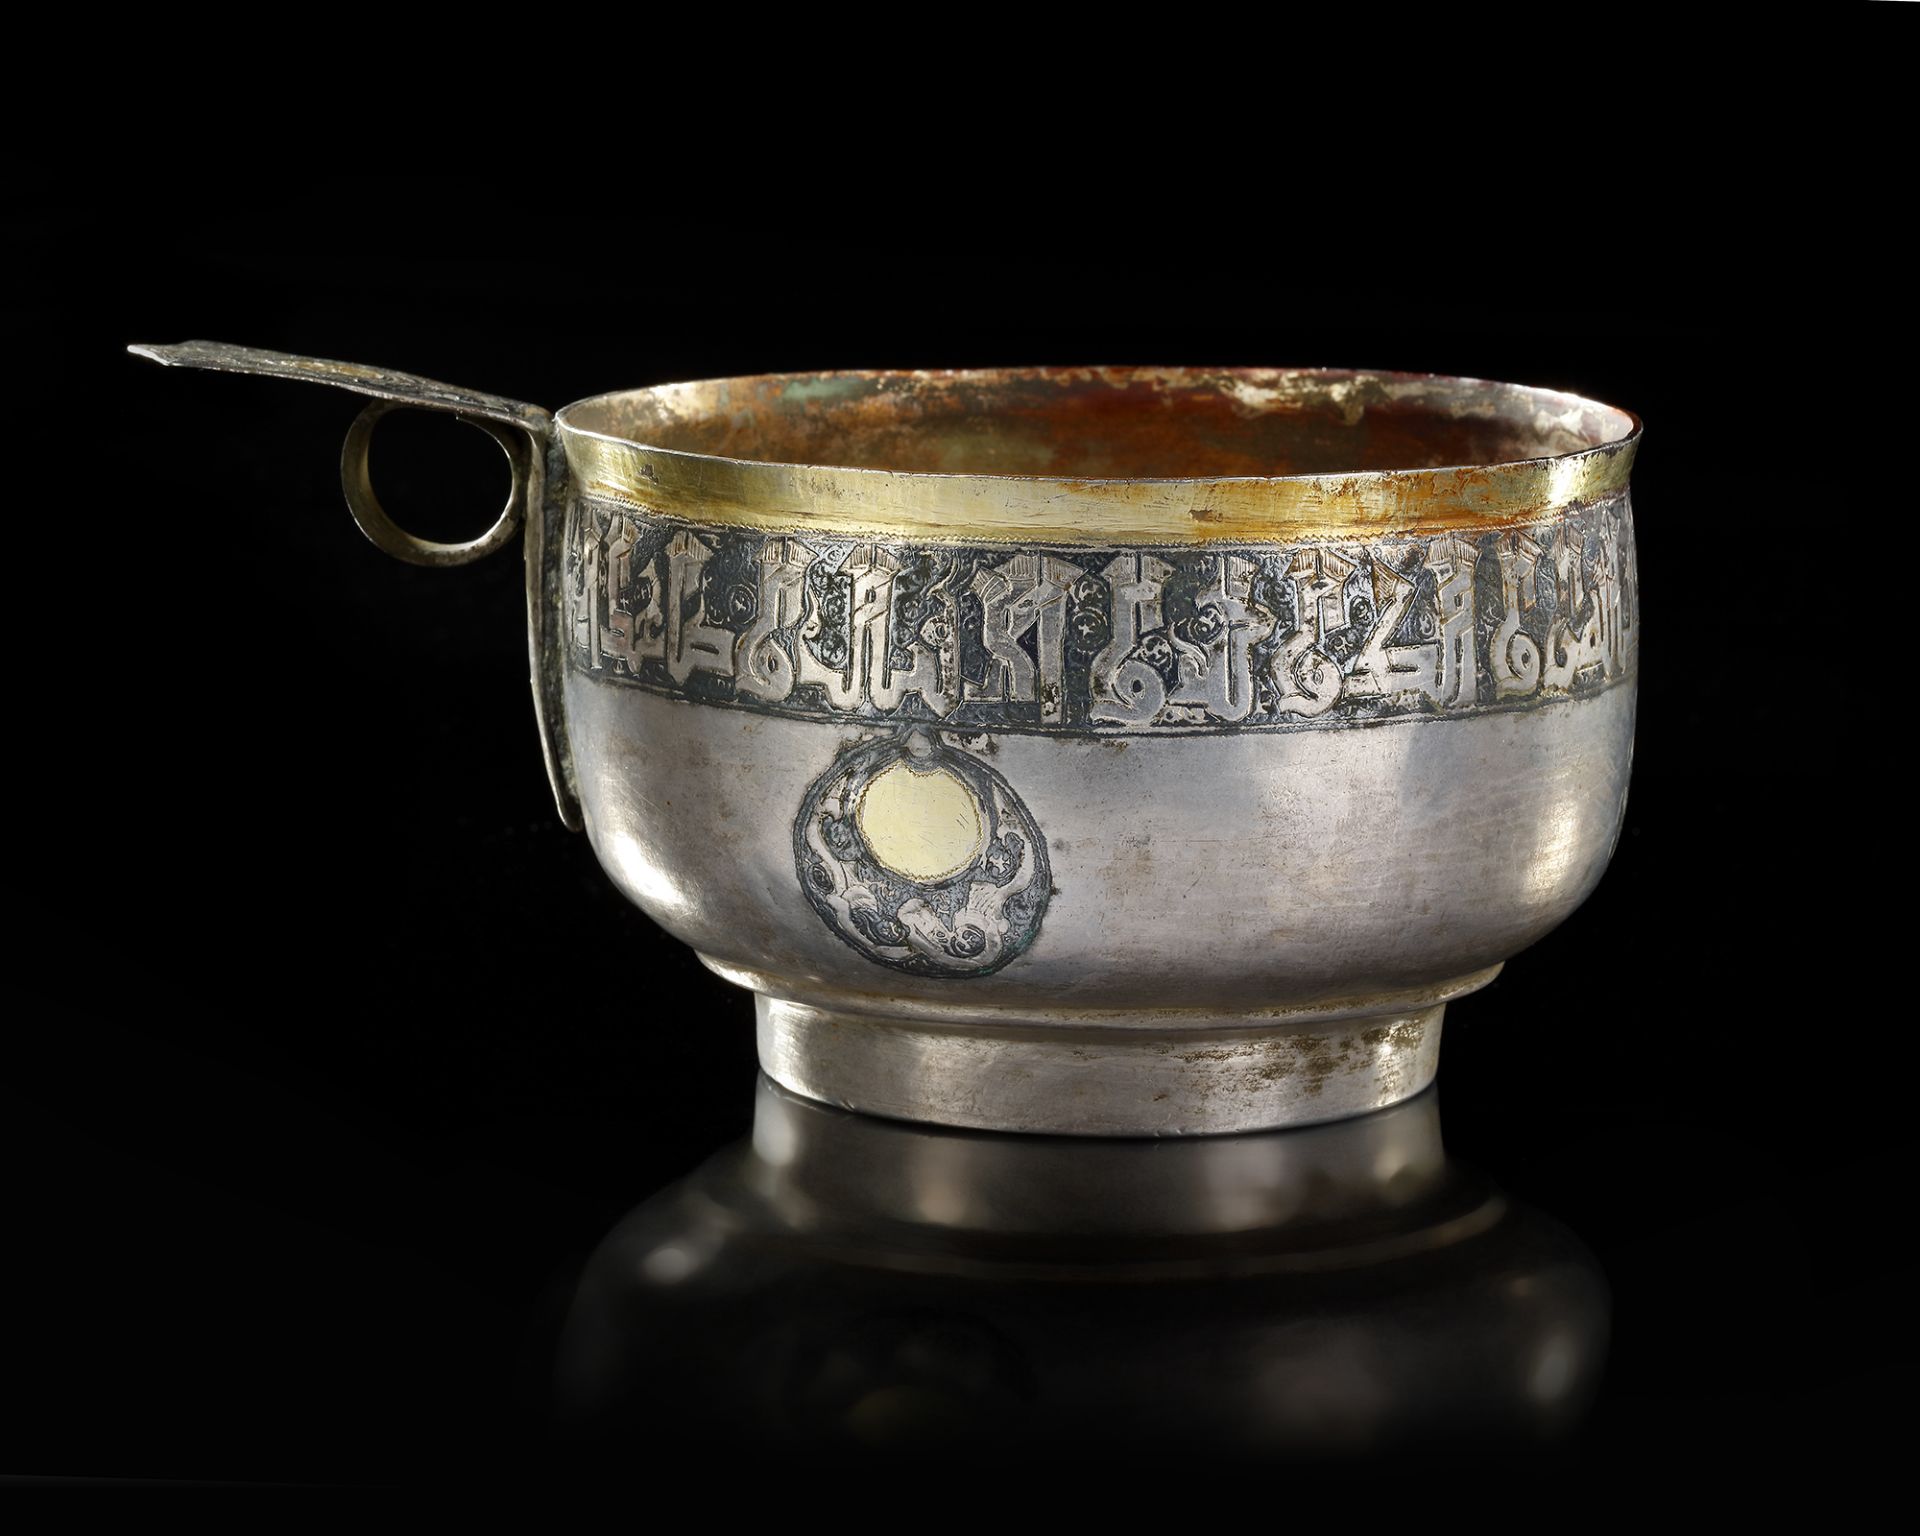 A RARE SILVER AND NIELLOED CUP WITH KUFIC INSCRIPTION, PERSIA OR CENTRAL ASIA, 11TH-12TH CENTURY - Image 8 of 34